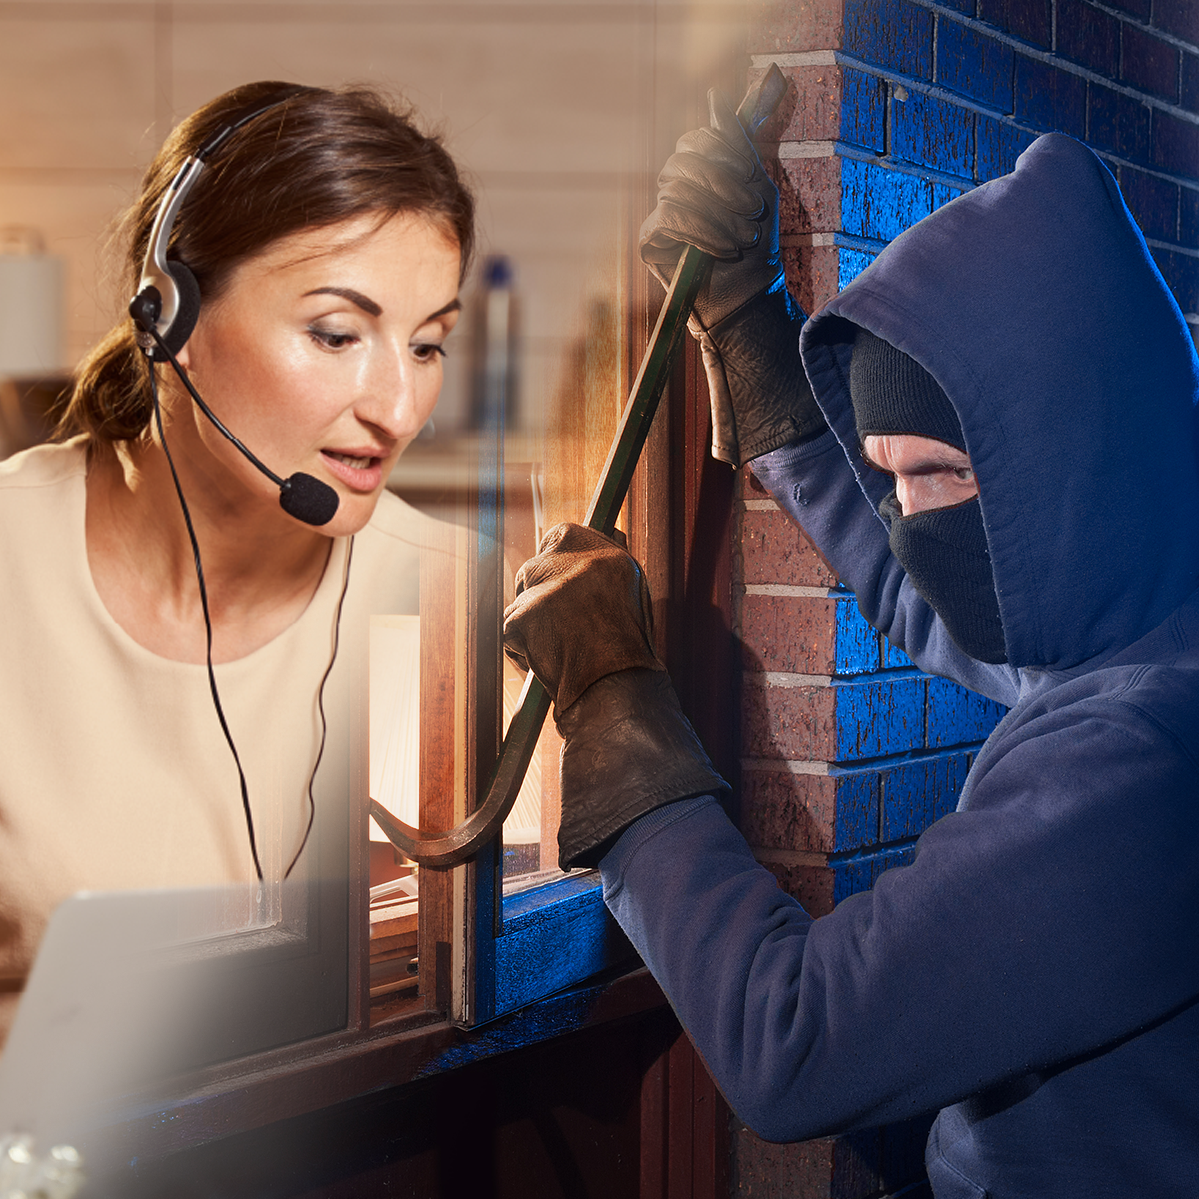 A split image of a worker on her headset, and the other half is a man breaking into a home with a crowbar.